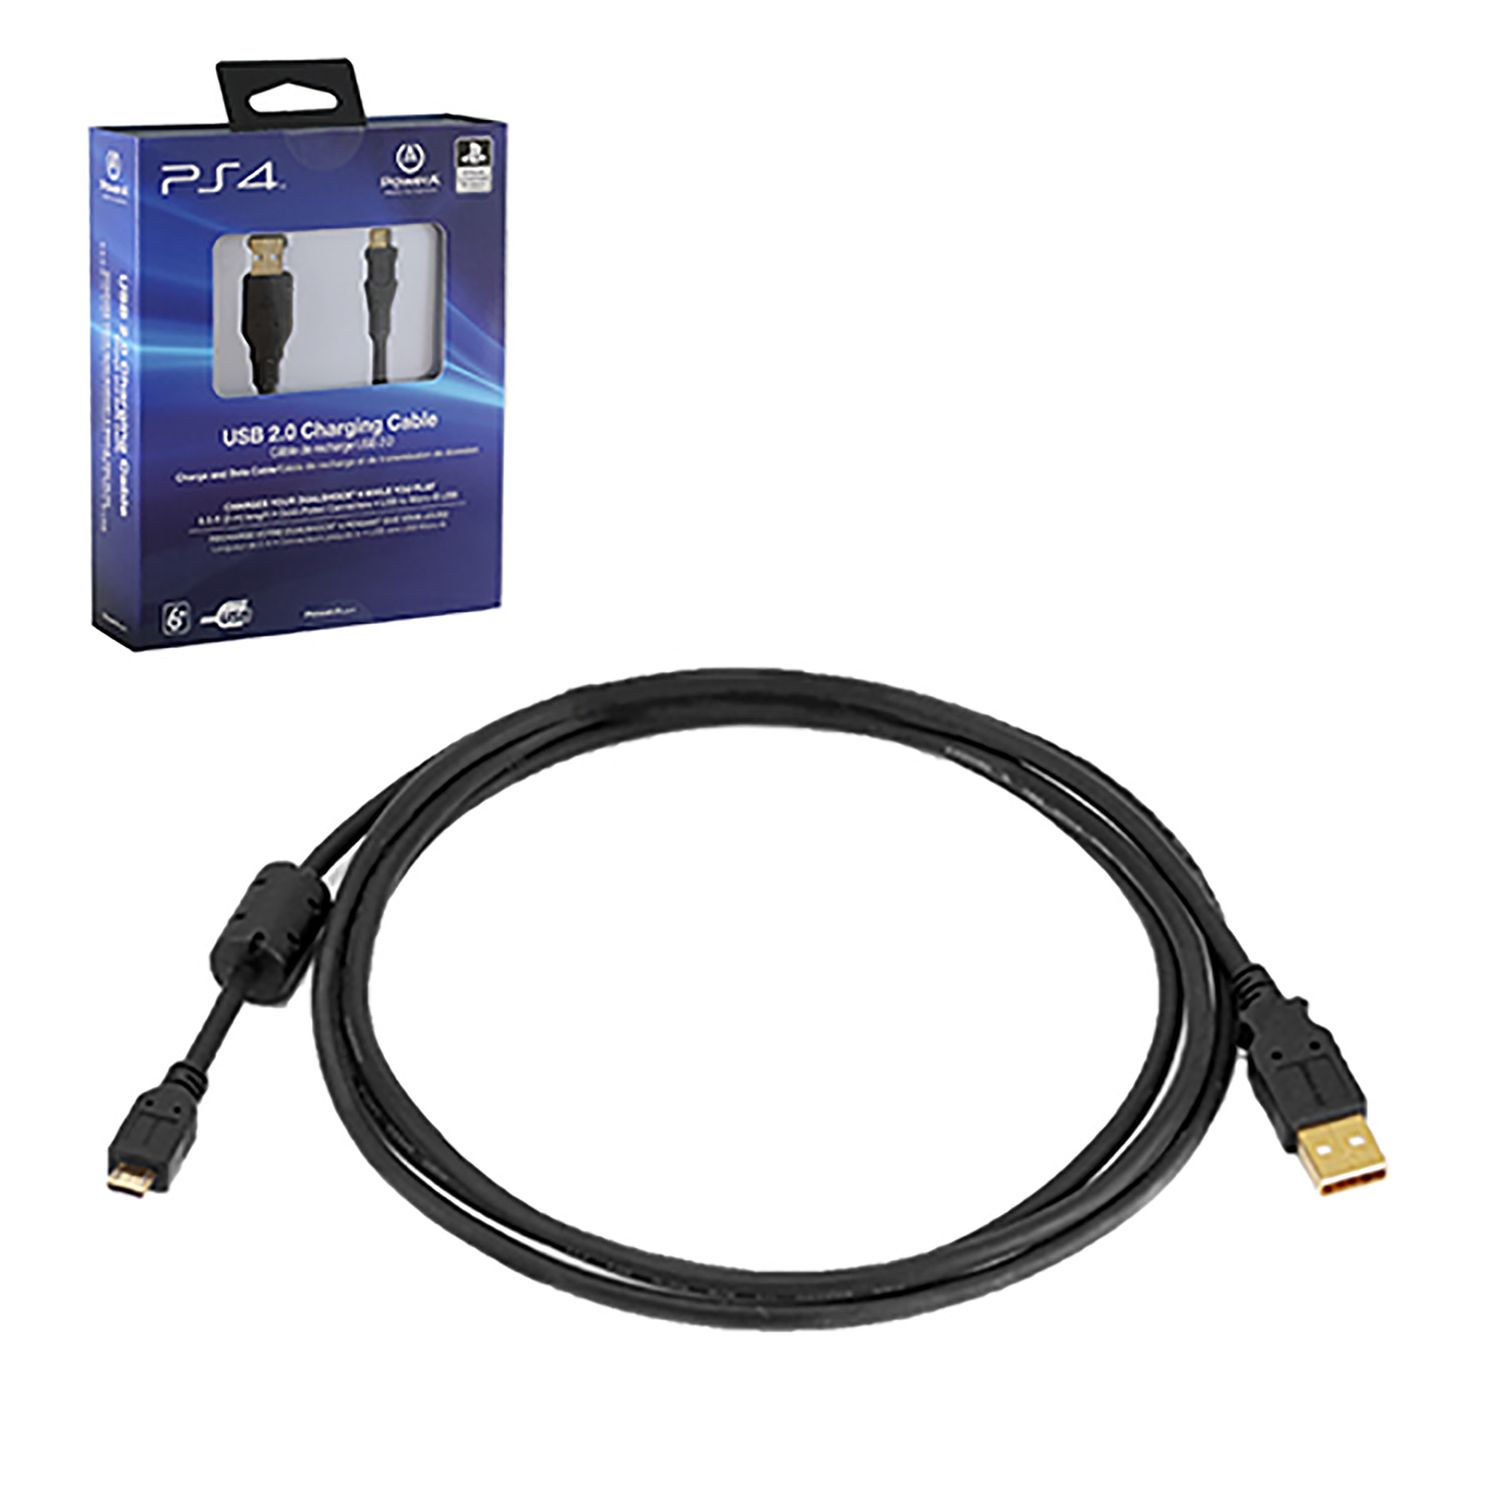 stege marxisme Fange PowerA USB Charge Cable for PlayStation 4 Black CPFA122462-02 - Best Buy